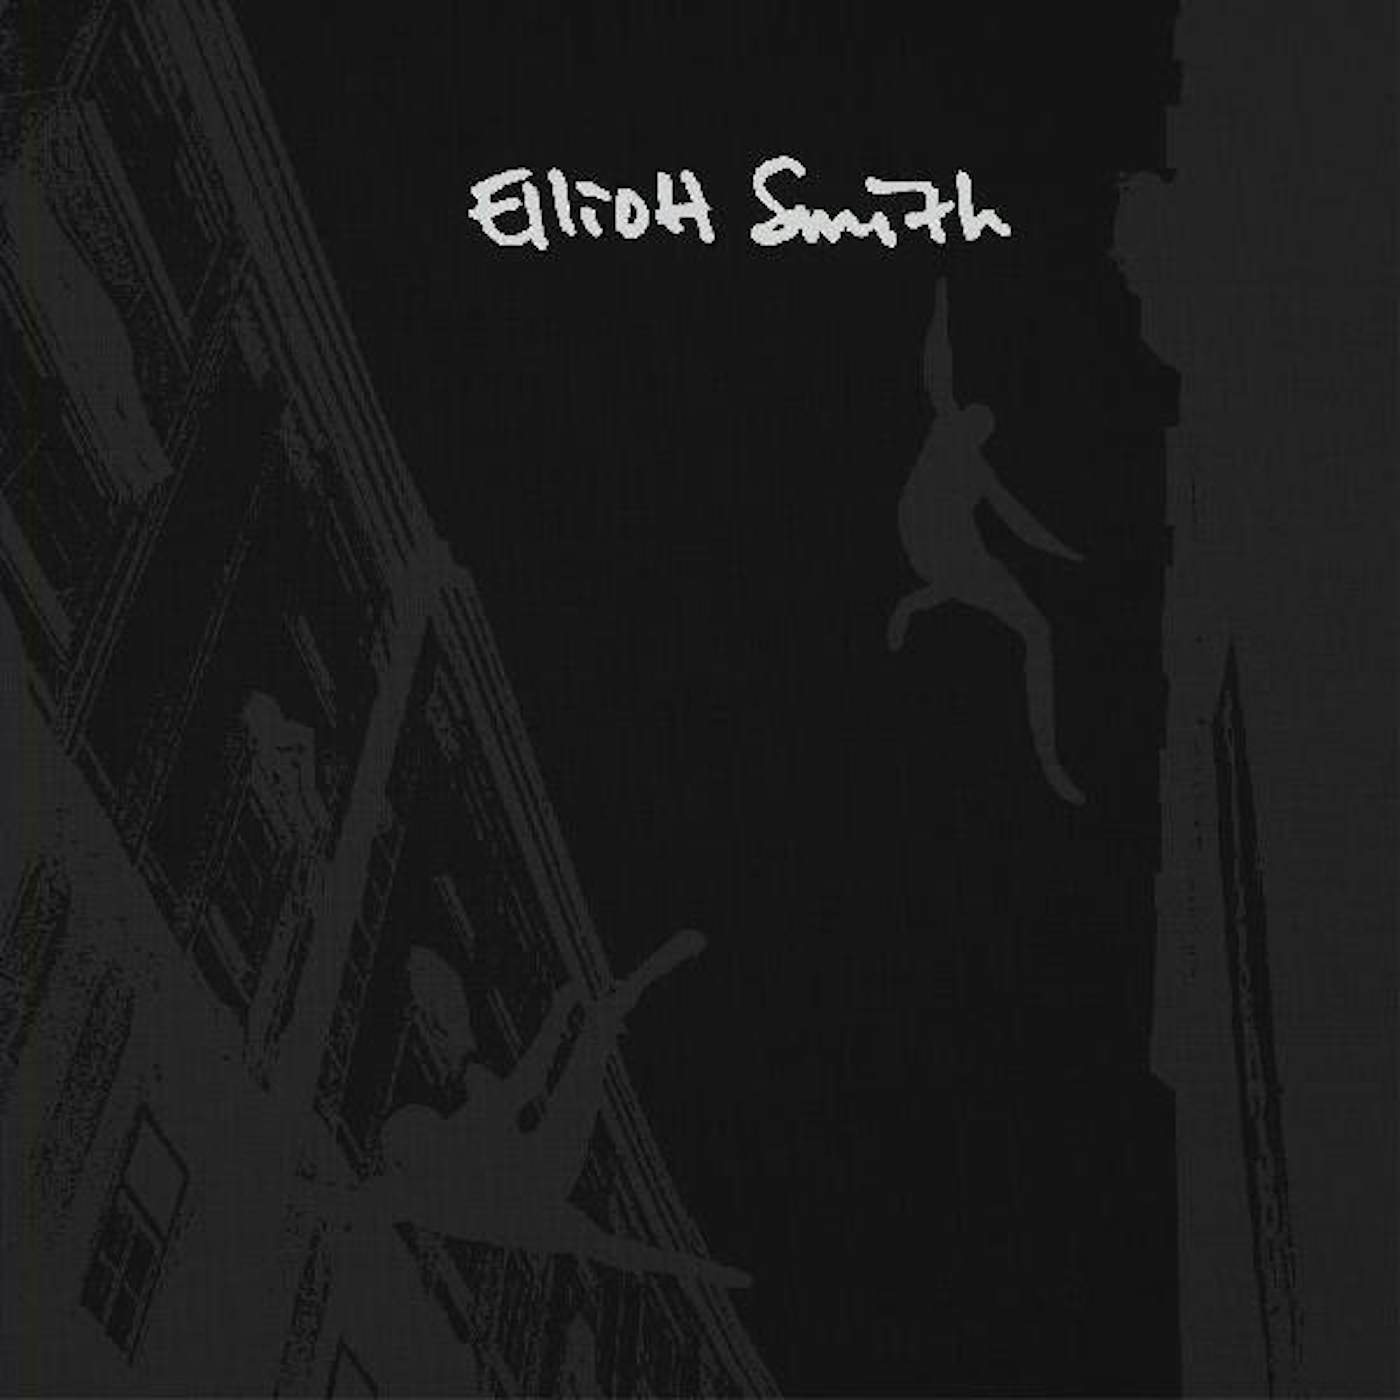 ELLIOTT SMITH: EXPANDED (25TH ANNIVERSARY EDITION) (2CD/BOOK) CD